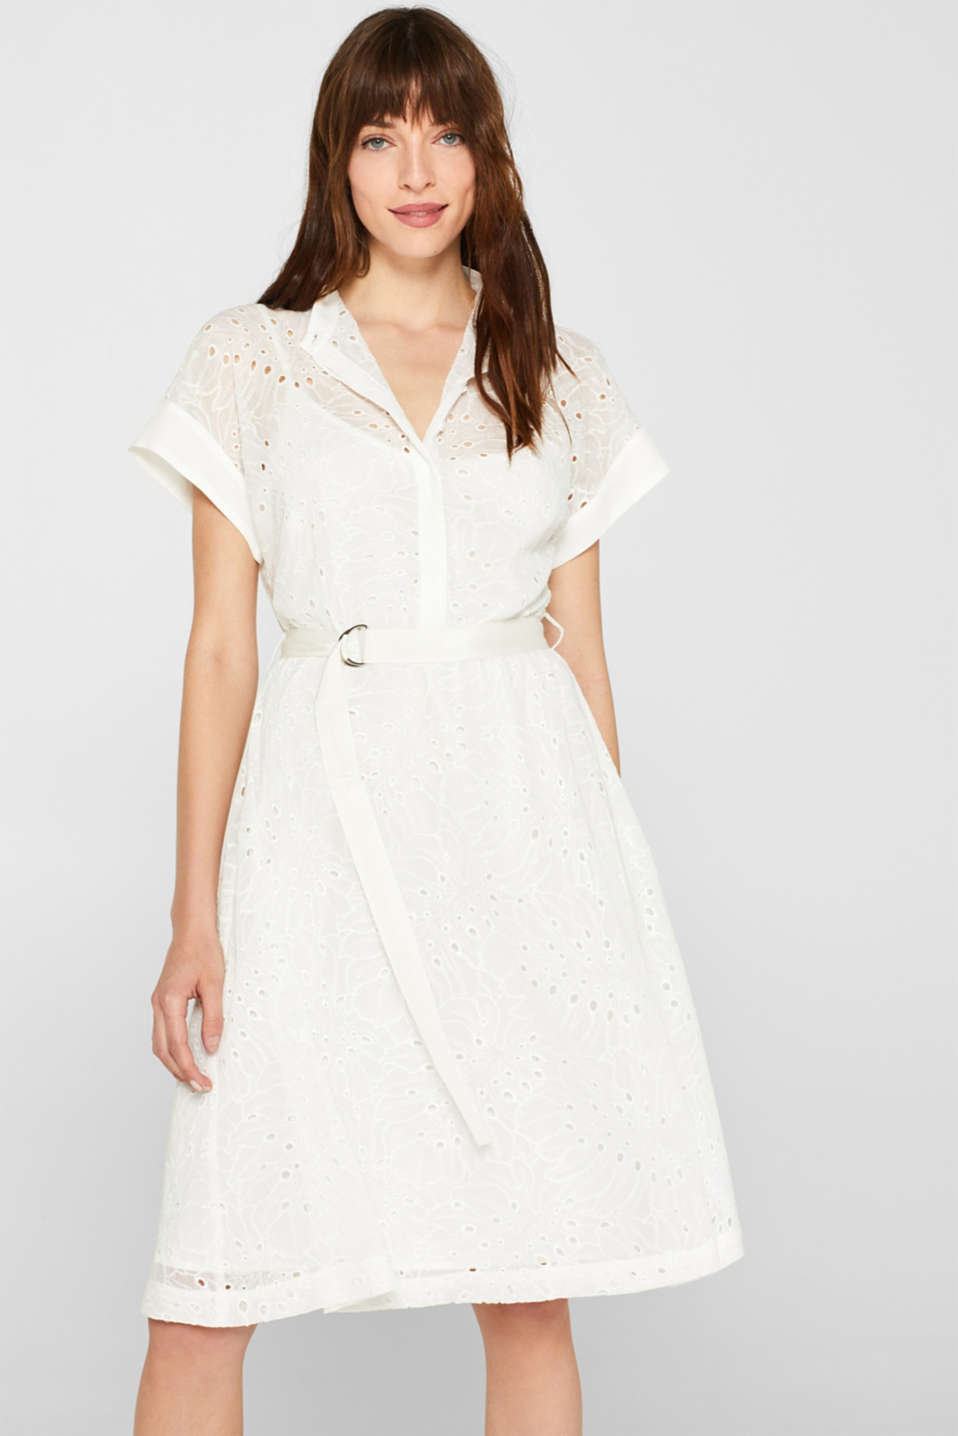 Esprit - Chiffon shirt dress with broderie anglaise